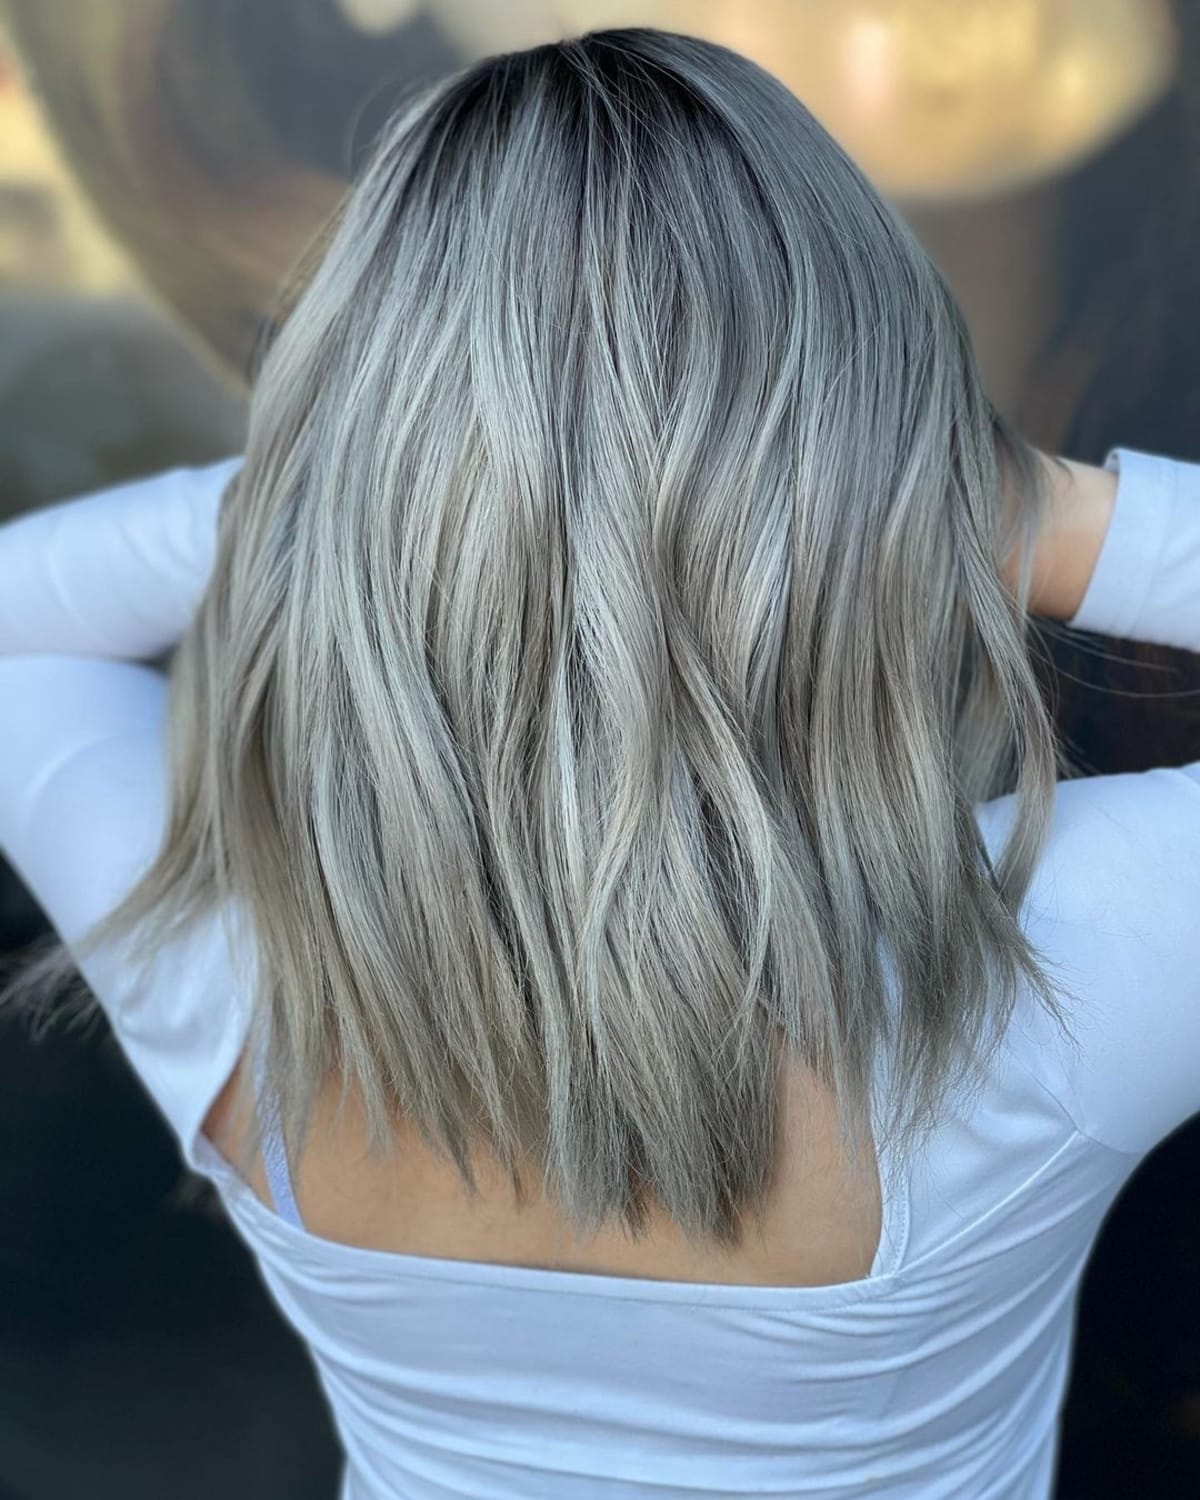 Gorgeous Ash Blonde with Dark Roots on Short Hair